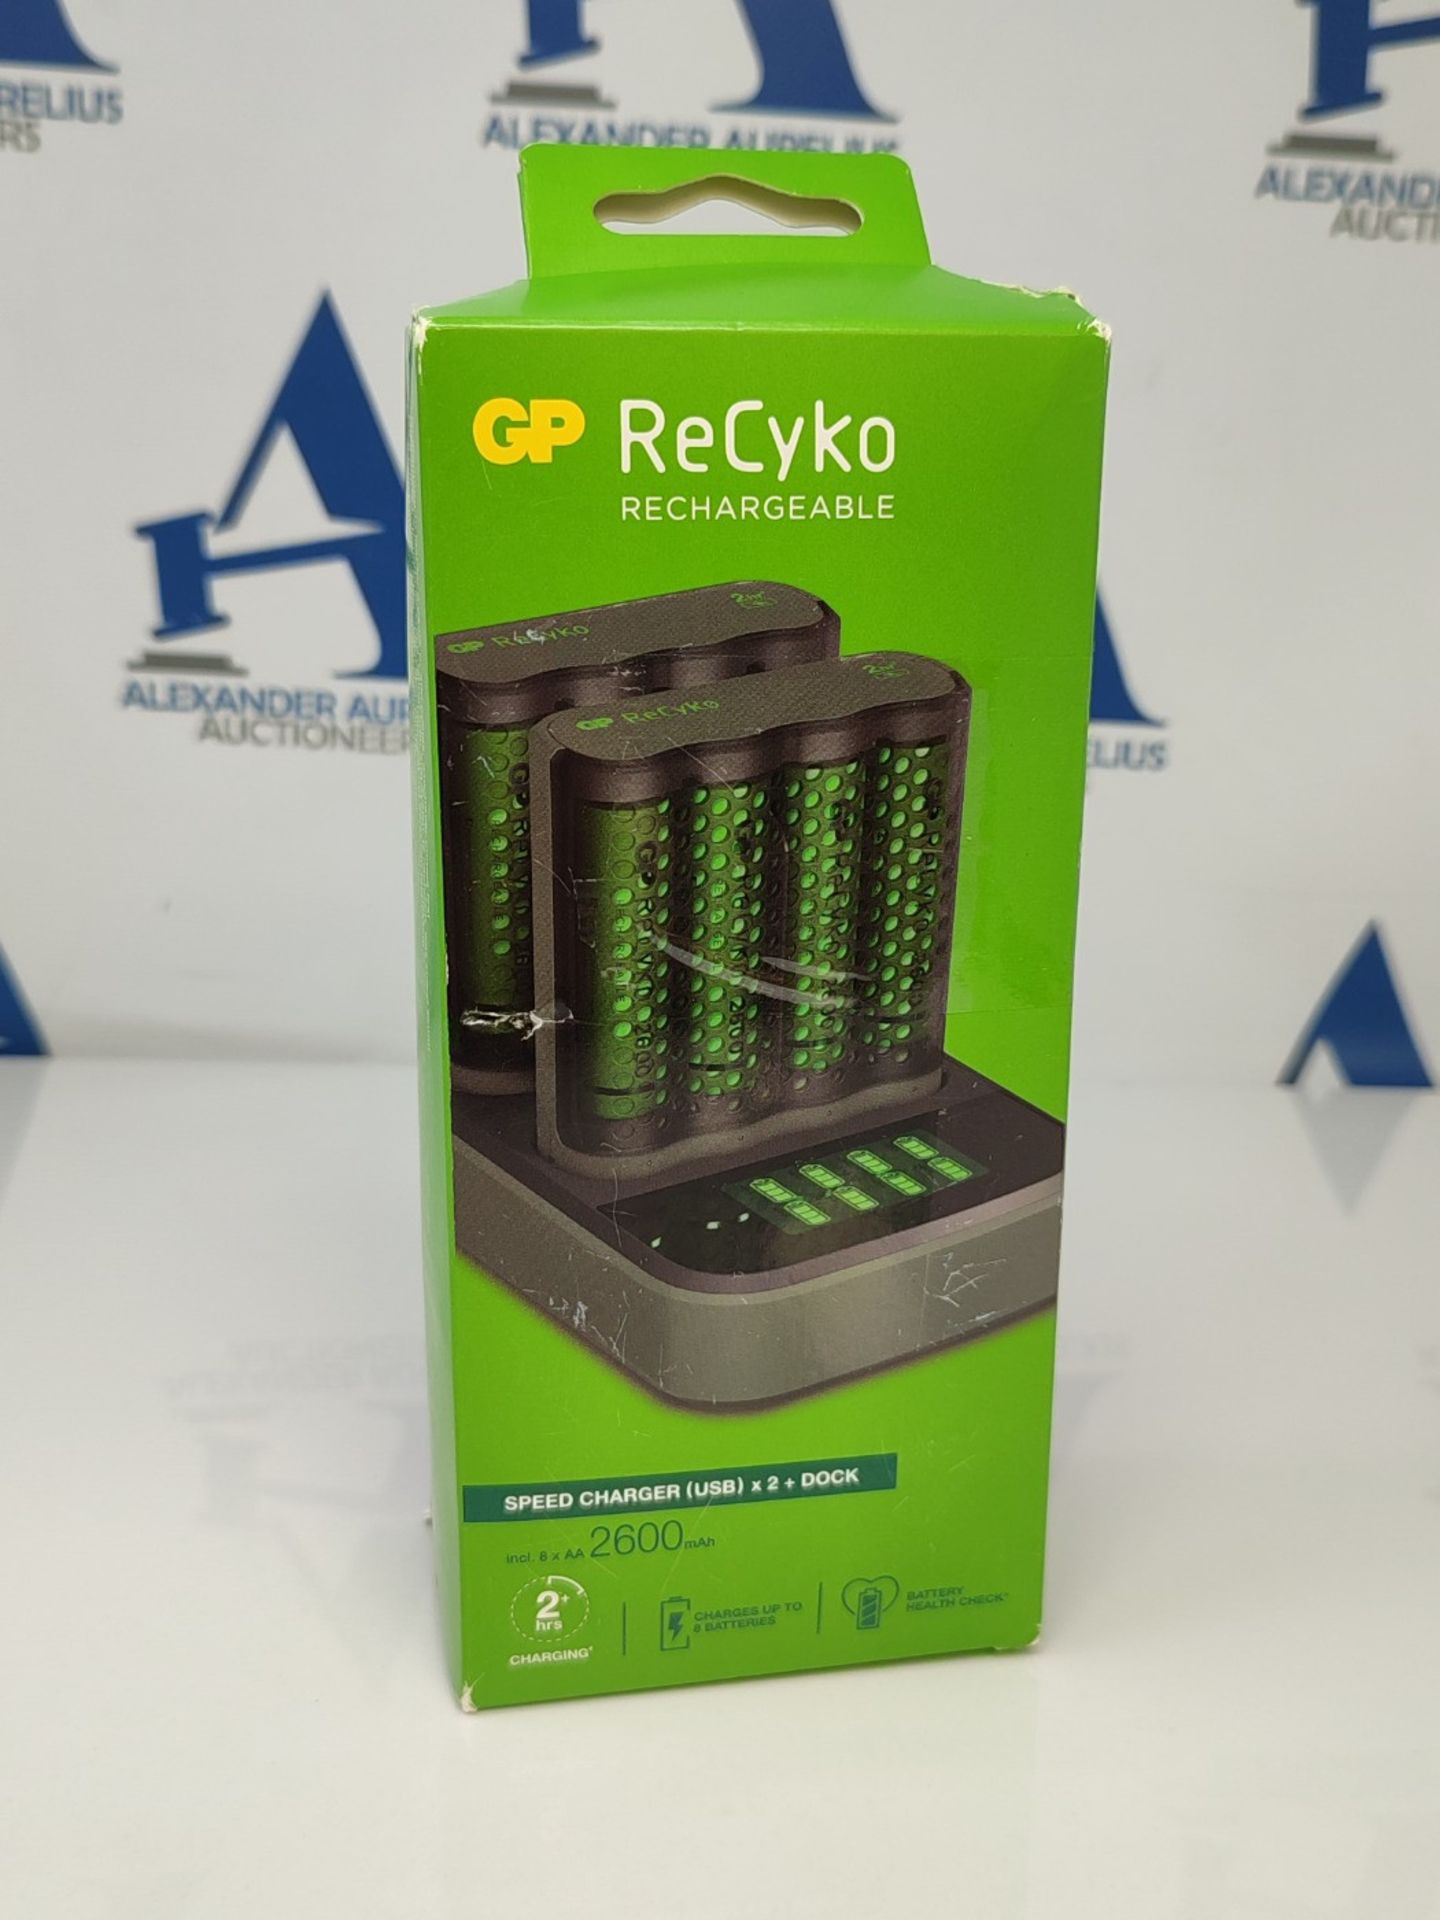 Quick USB Charger with 8 Rechargeable AA Batteries 2600 mAh included and LED display | - Image 5 of 6